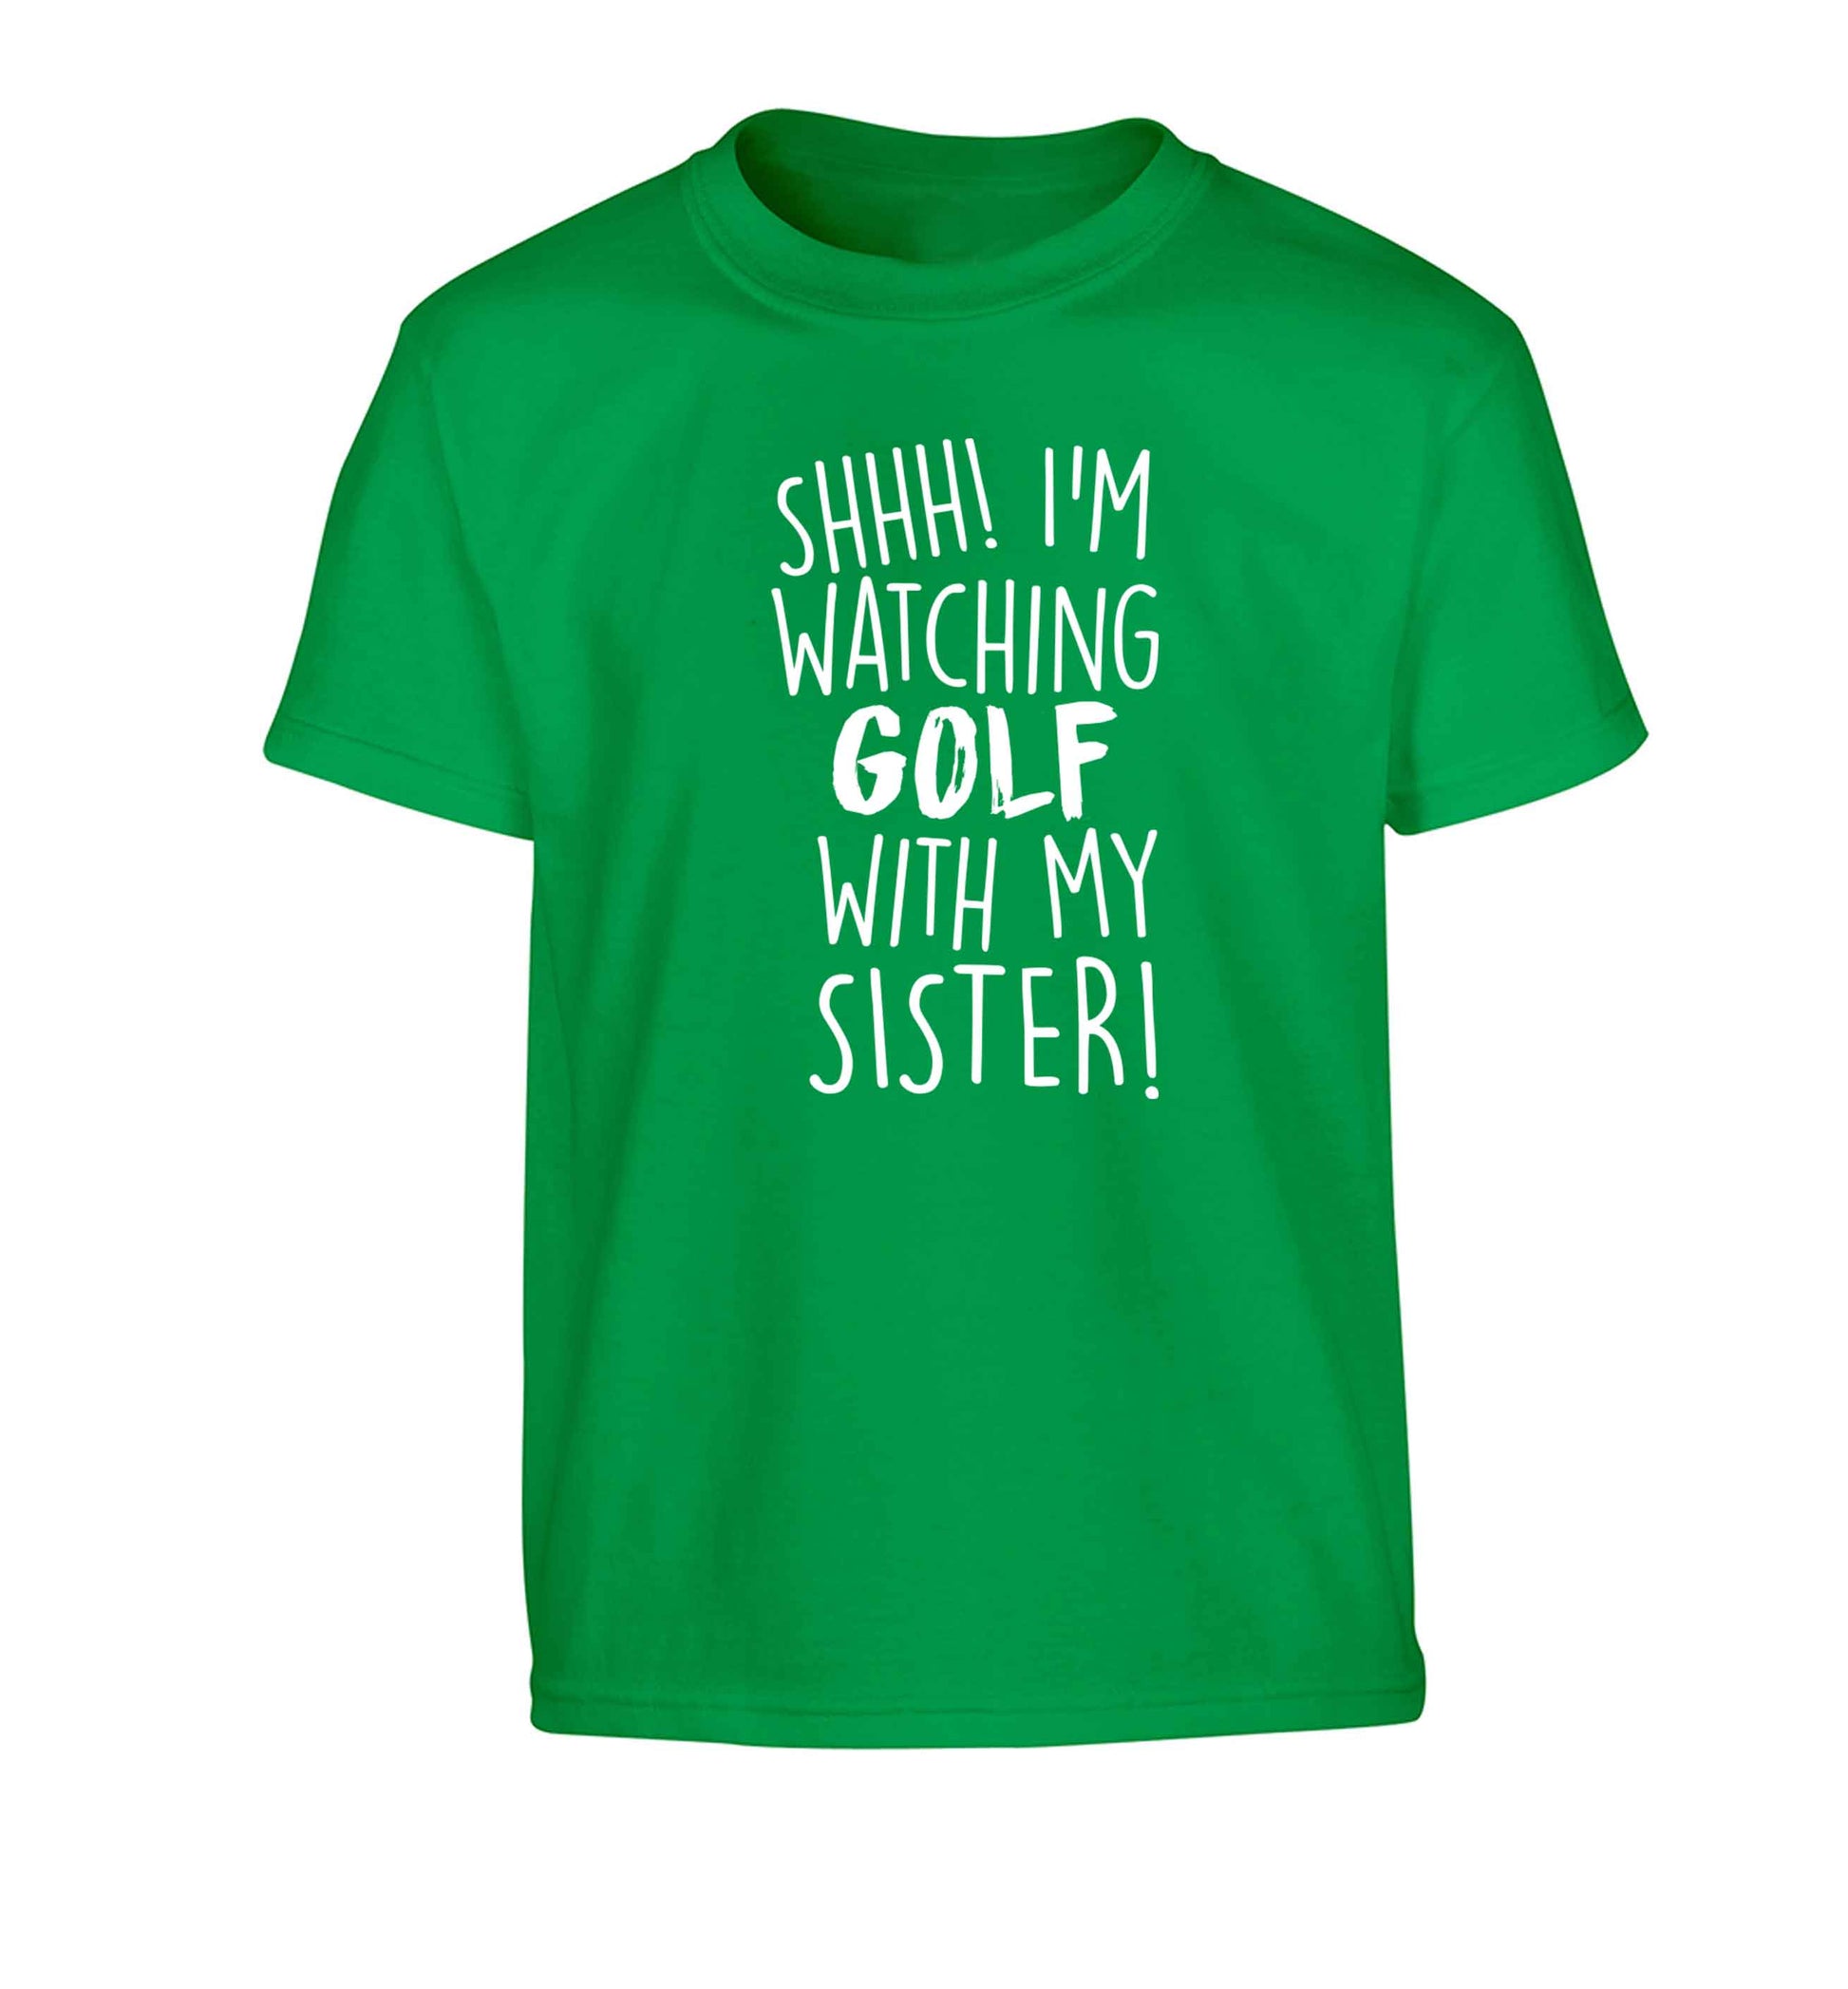 Shh I'm watching golf with my sister Children's green Tshirt 12-13 Years